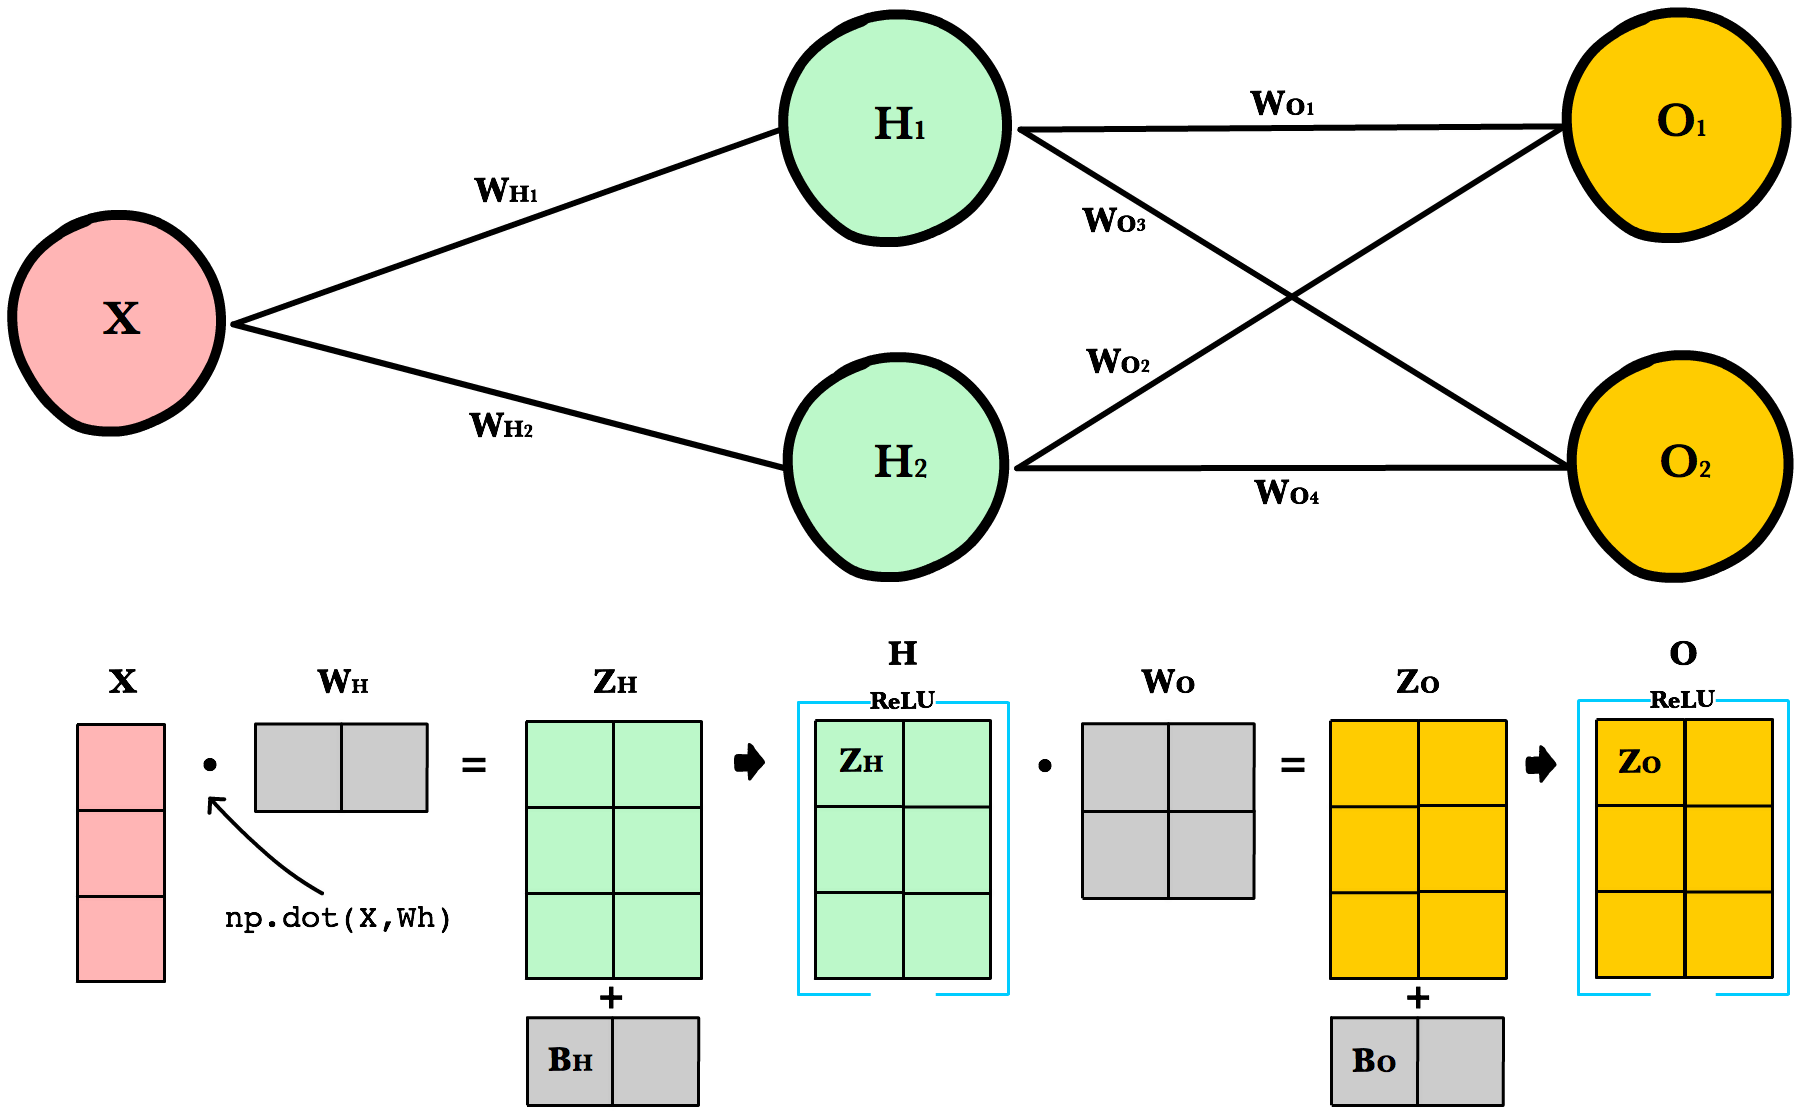 _images/nn_with_matrices_displayed.png